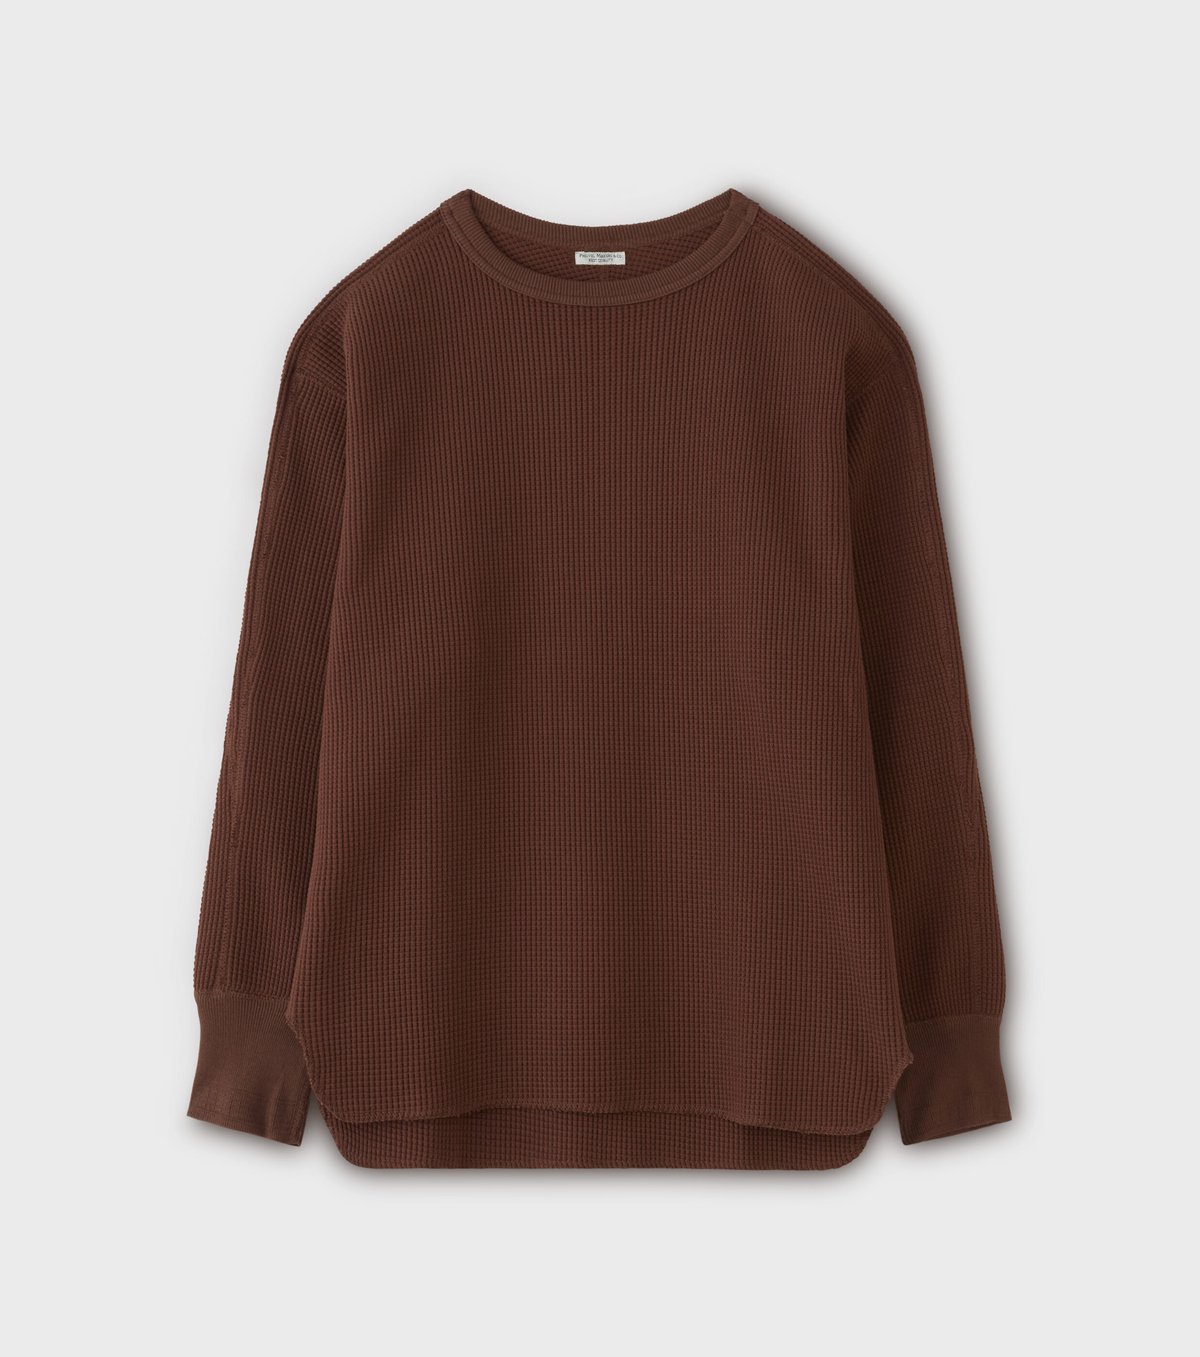 PHIGVEL‐MAKERS Co. HEAVY WAFFLE TOP （RUSSET） |